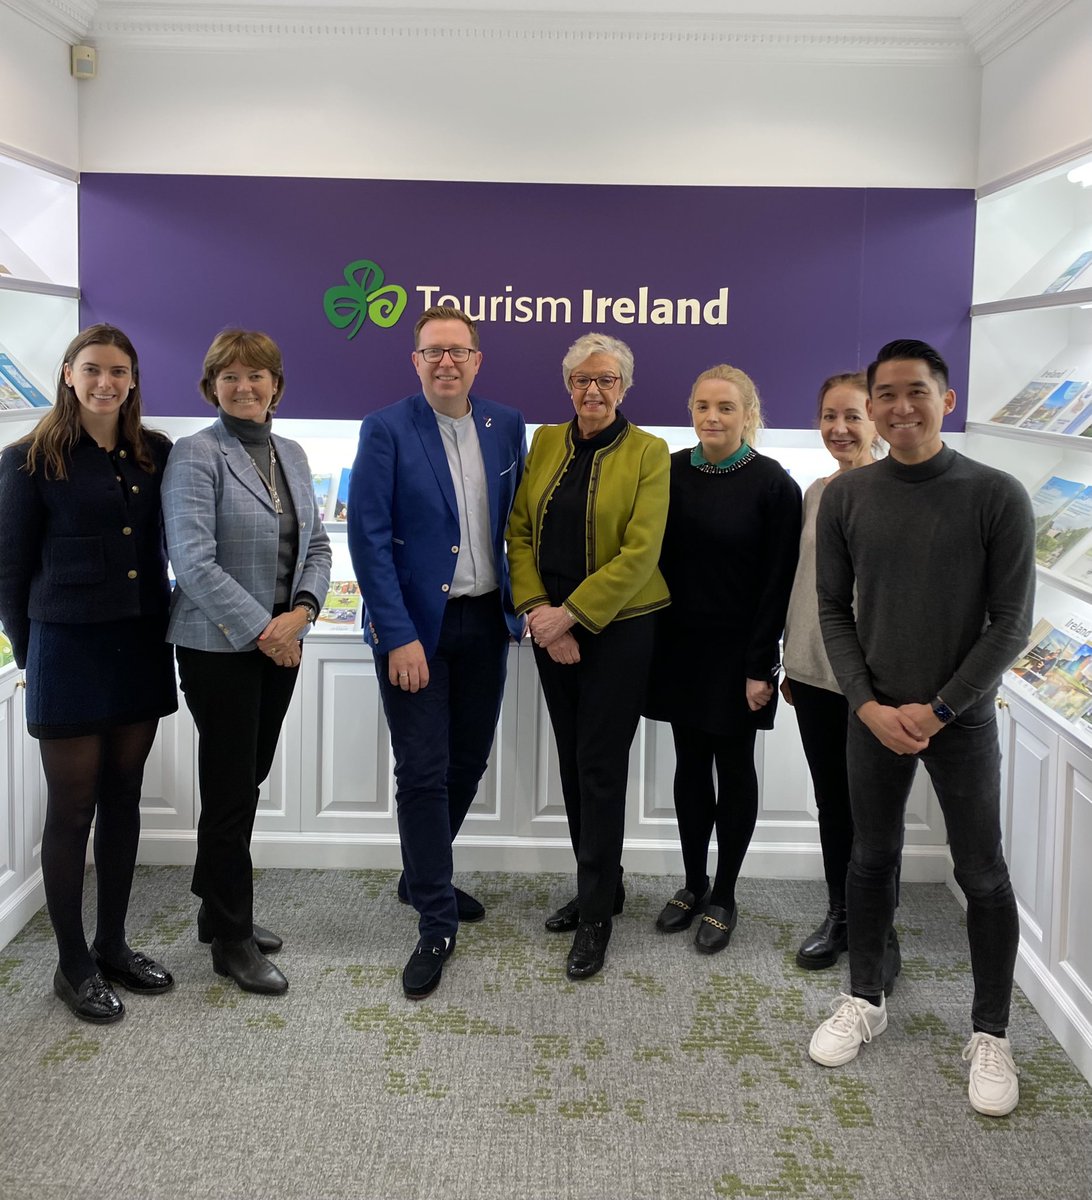 Such a pleasure to visit the offices of @TourismIreland in NY yesterday following my arrival to the city. What a welcome received from @metcalfealison1, Hillarie, Jeffrey, Eimear & the team. Alison your hospitality and warmth was truly exceptional. See you all soon in Cork..